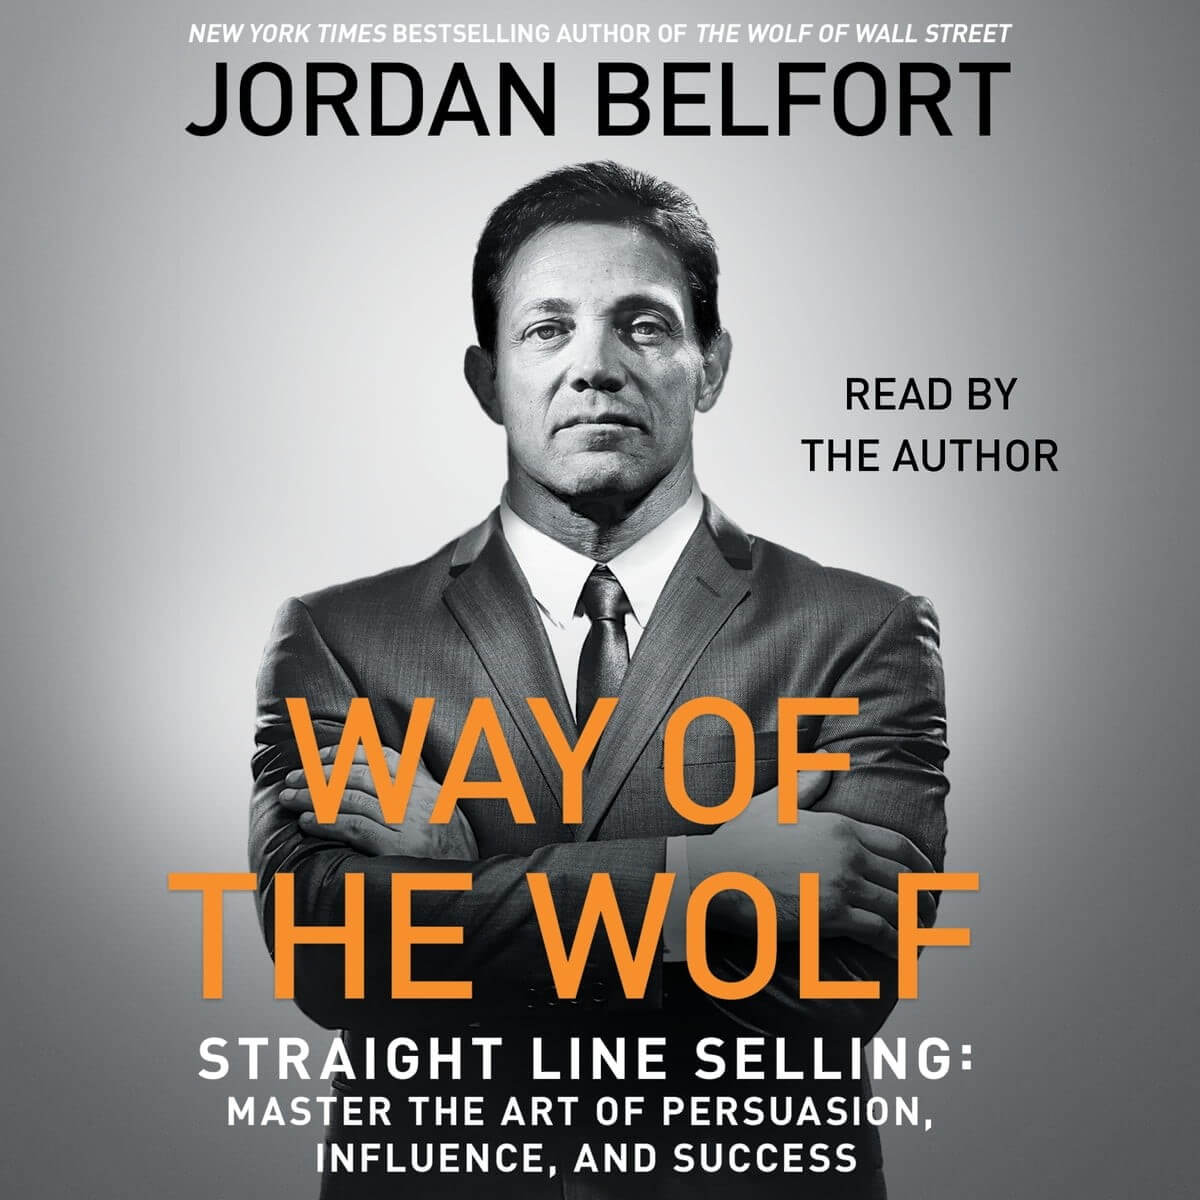 Real Jordan Belfort_Wolf of Wall Street 20220504 -The Way of the Wolf 33